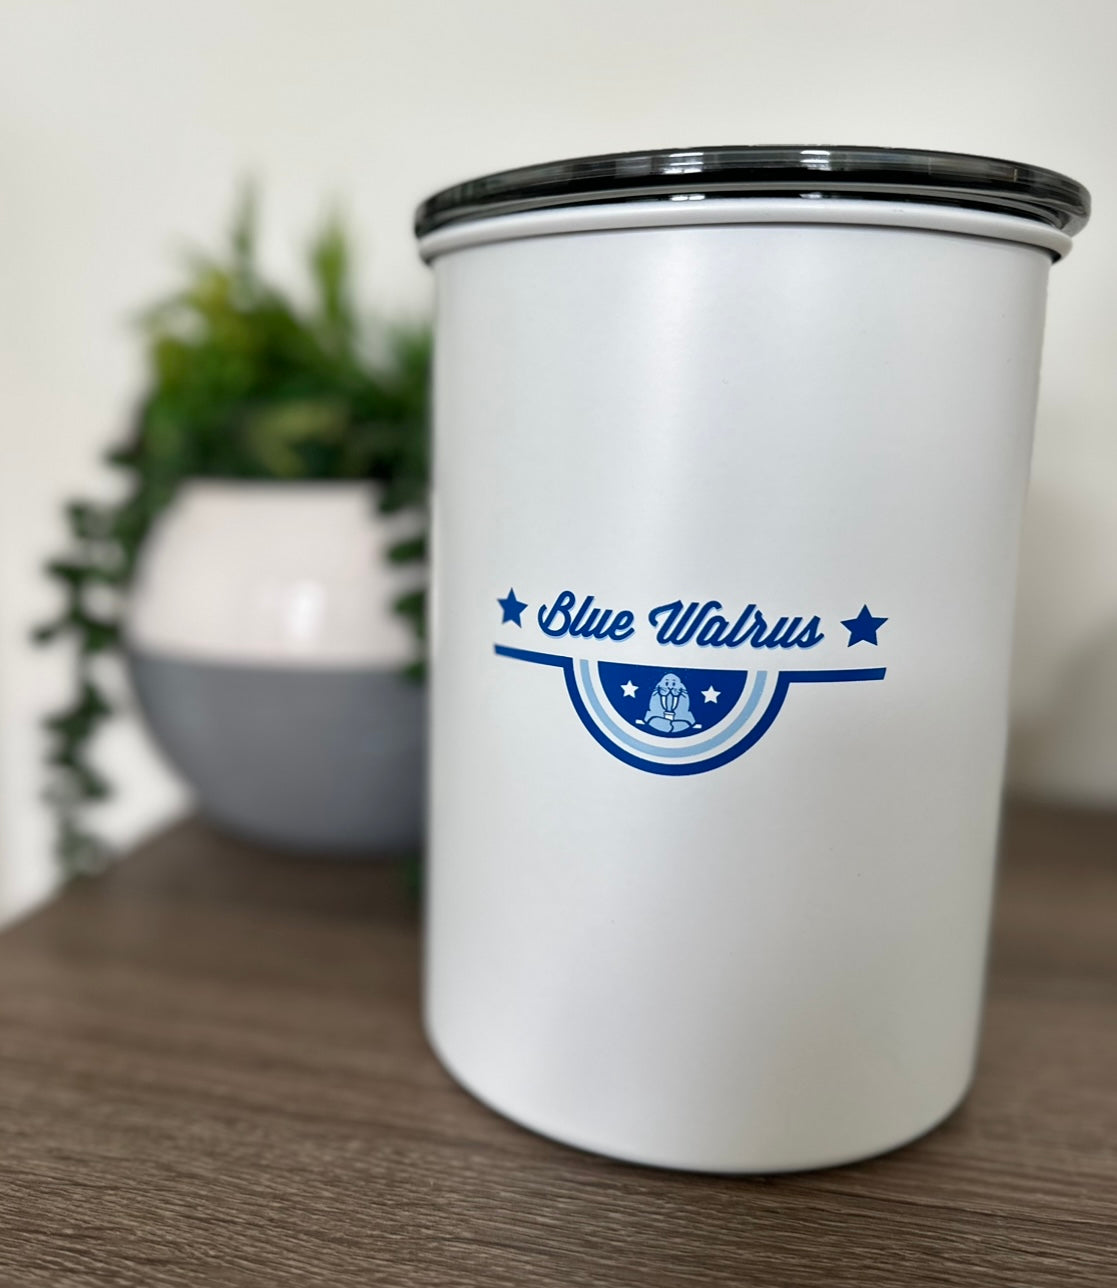 Blue Walrus Airscape® 64oz Canister